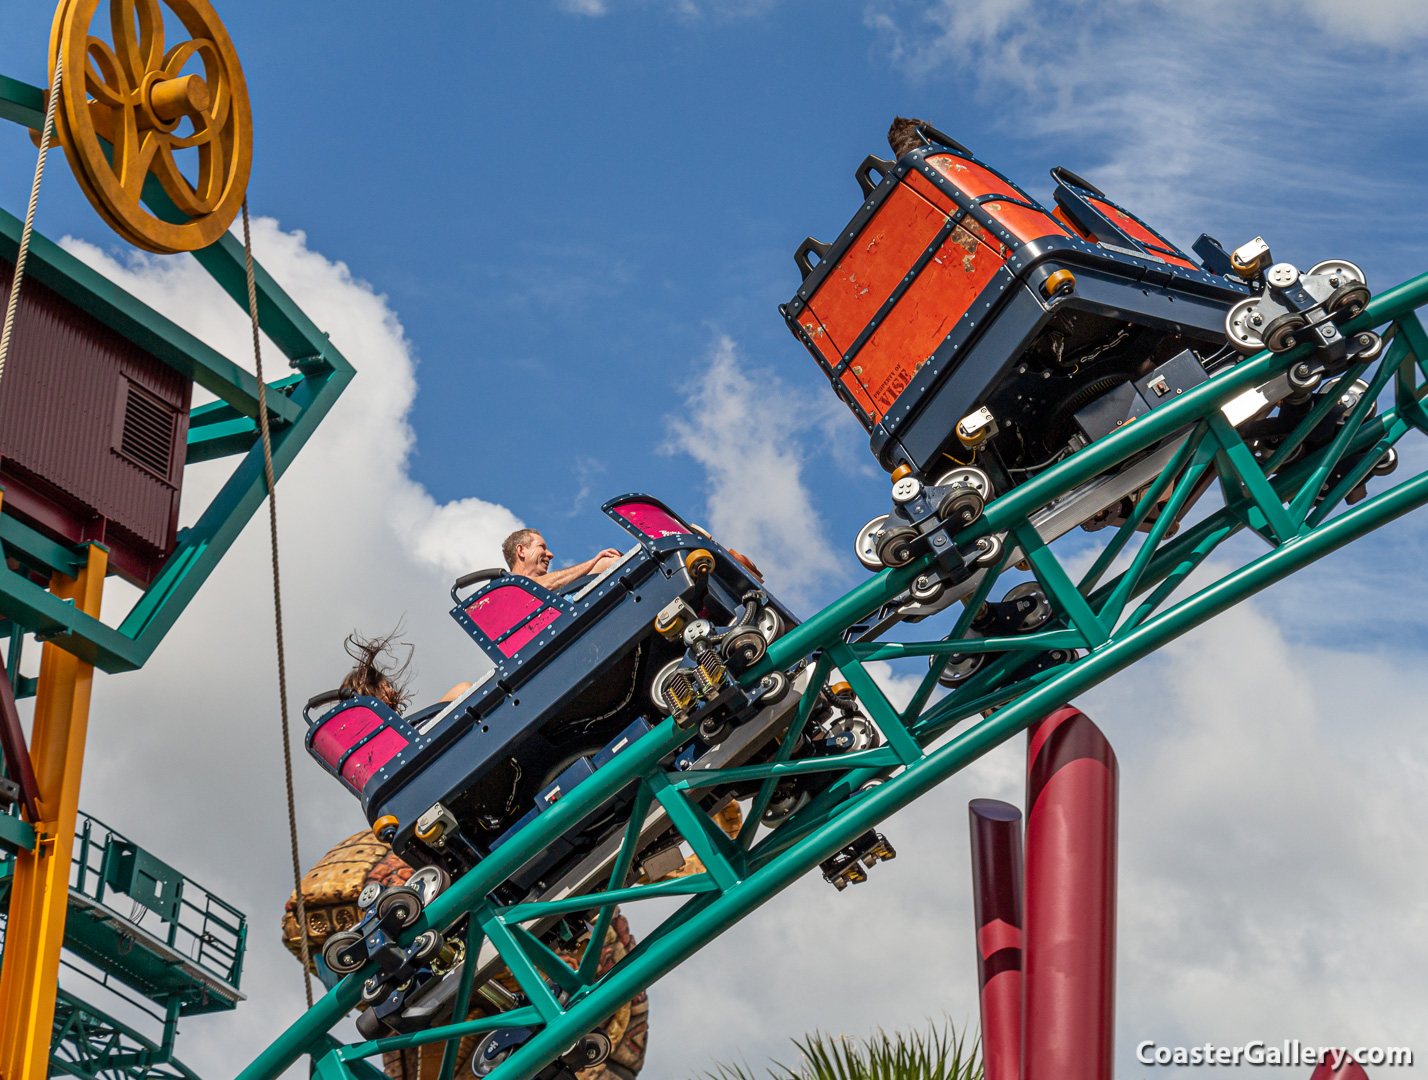 Spinning Roller Coaster - pictures of the Cobra's Curse thrill ride at Busch Gardens Tampa Bay